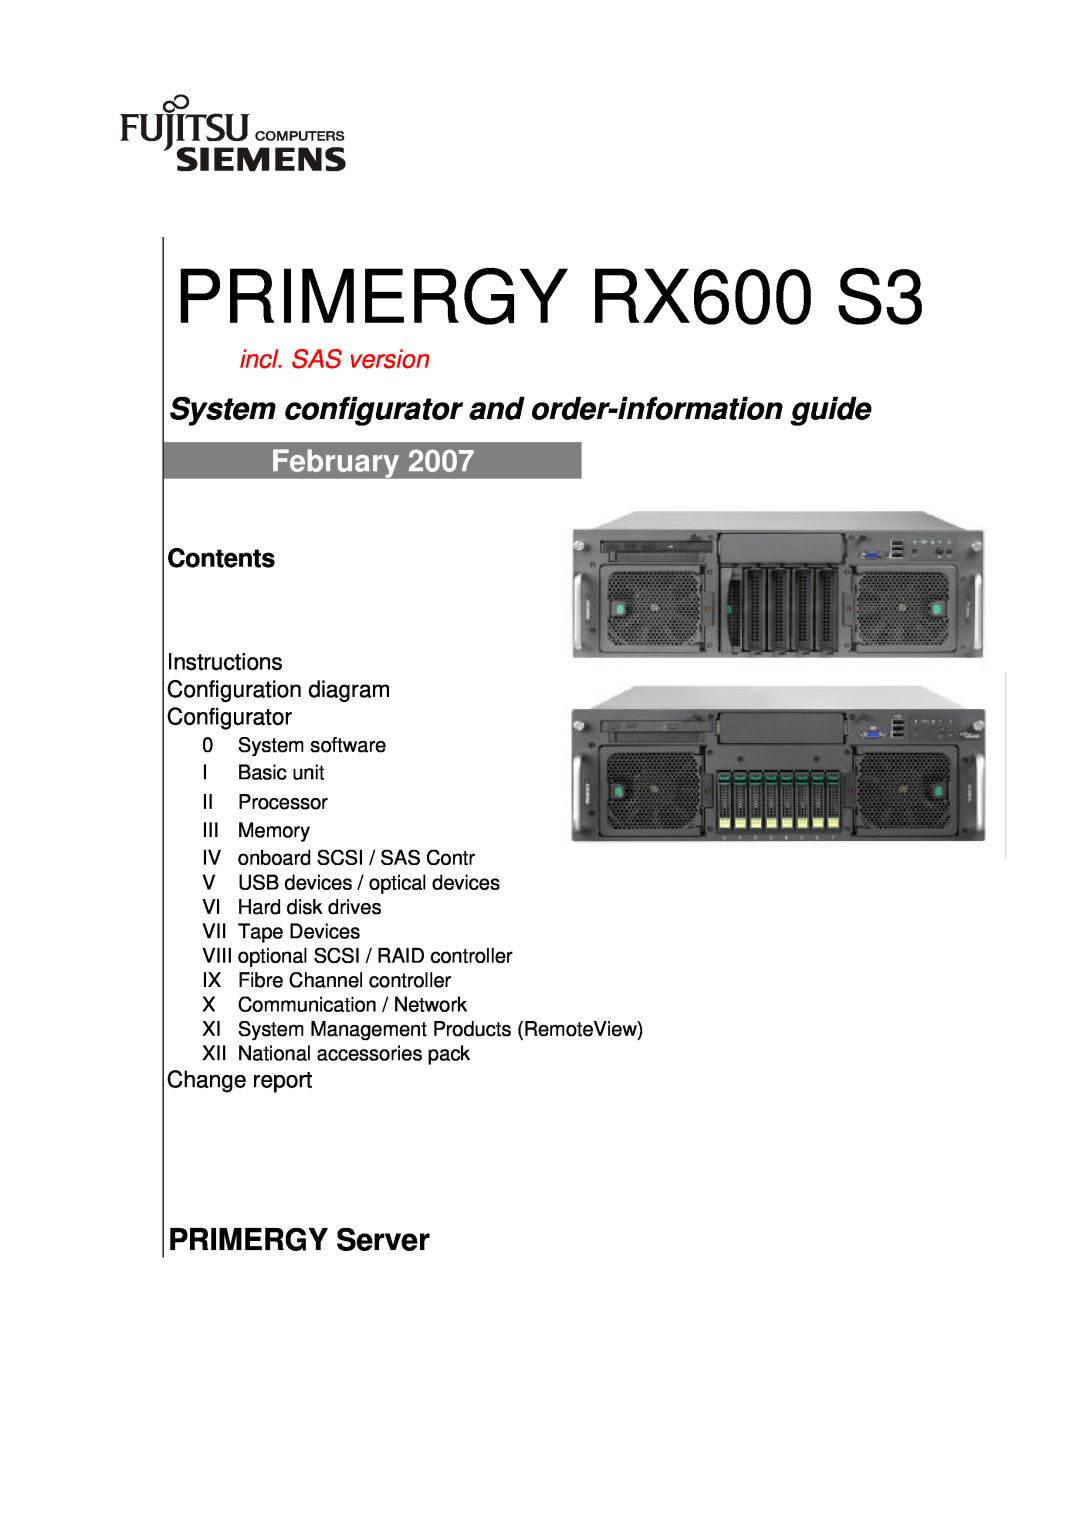 Fujitsu Siemens Computers manual PRIMERGY RX600 S3, System configurator and order-information guide, February, Contents 